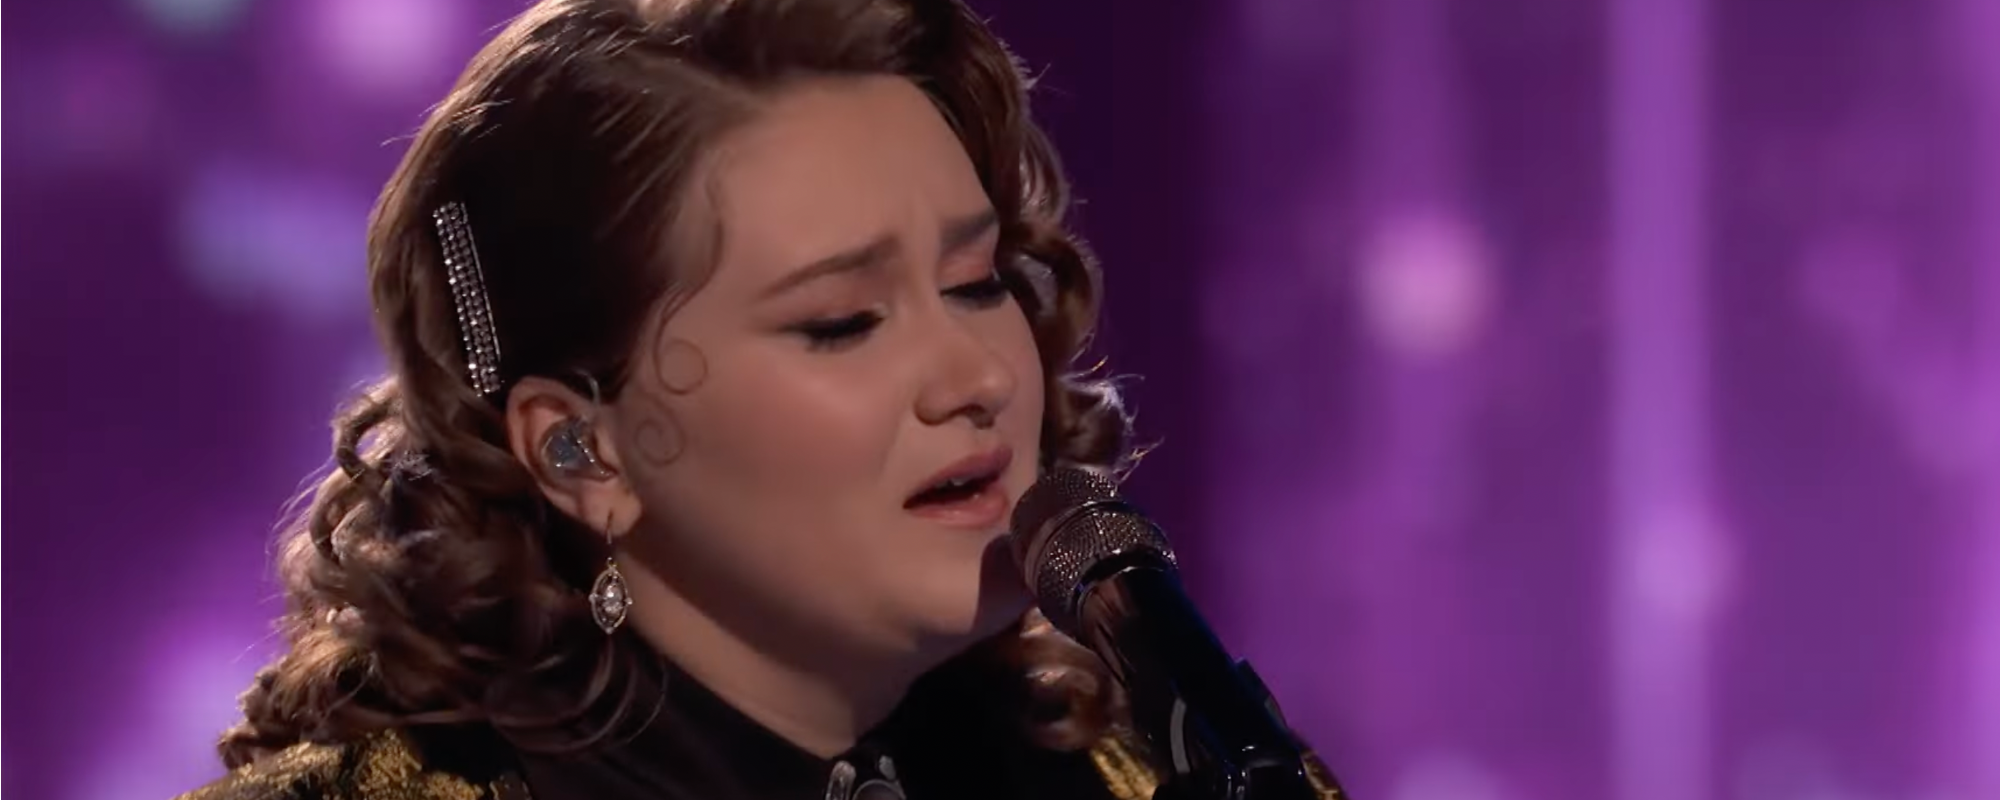 Ruby Leigh Delivers Emotional Cover of “Desperado” by the Eagles on ‘The Voice’ Finale